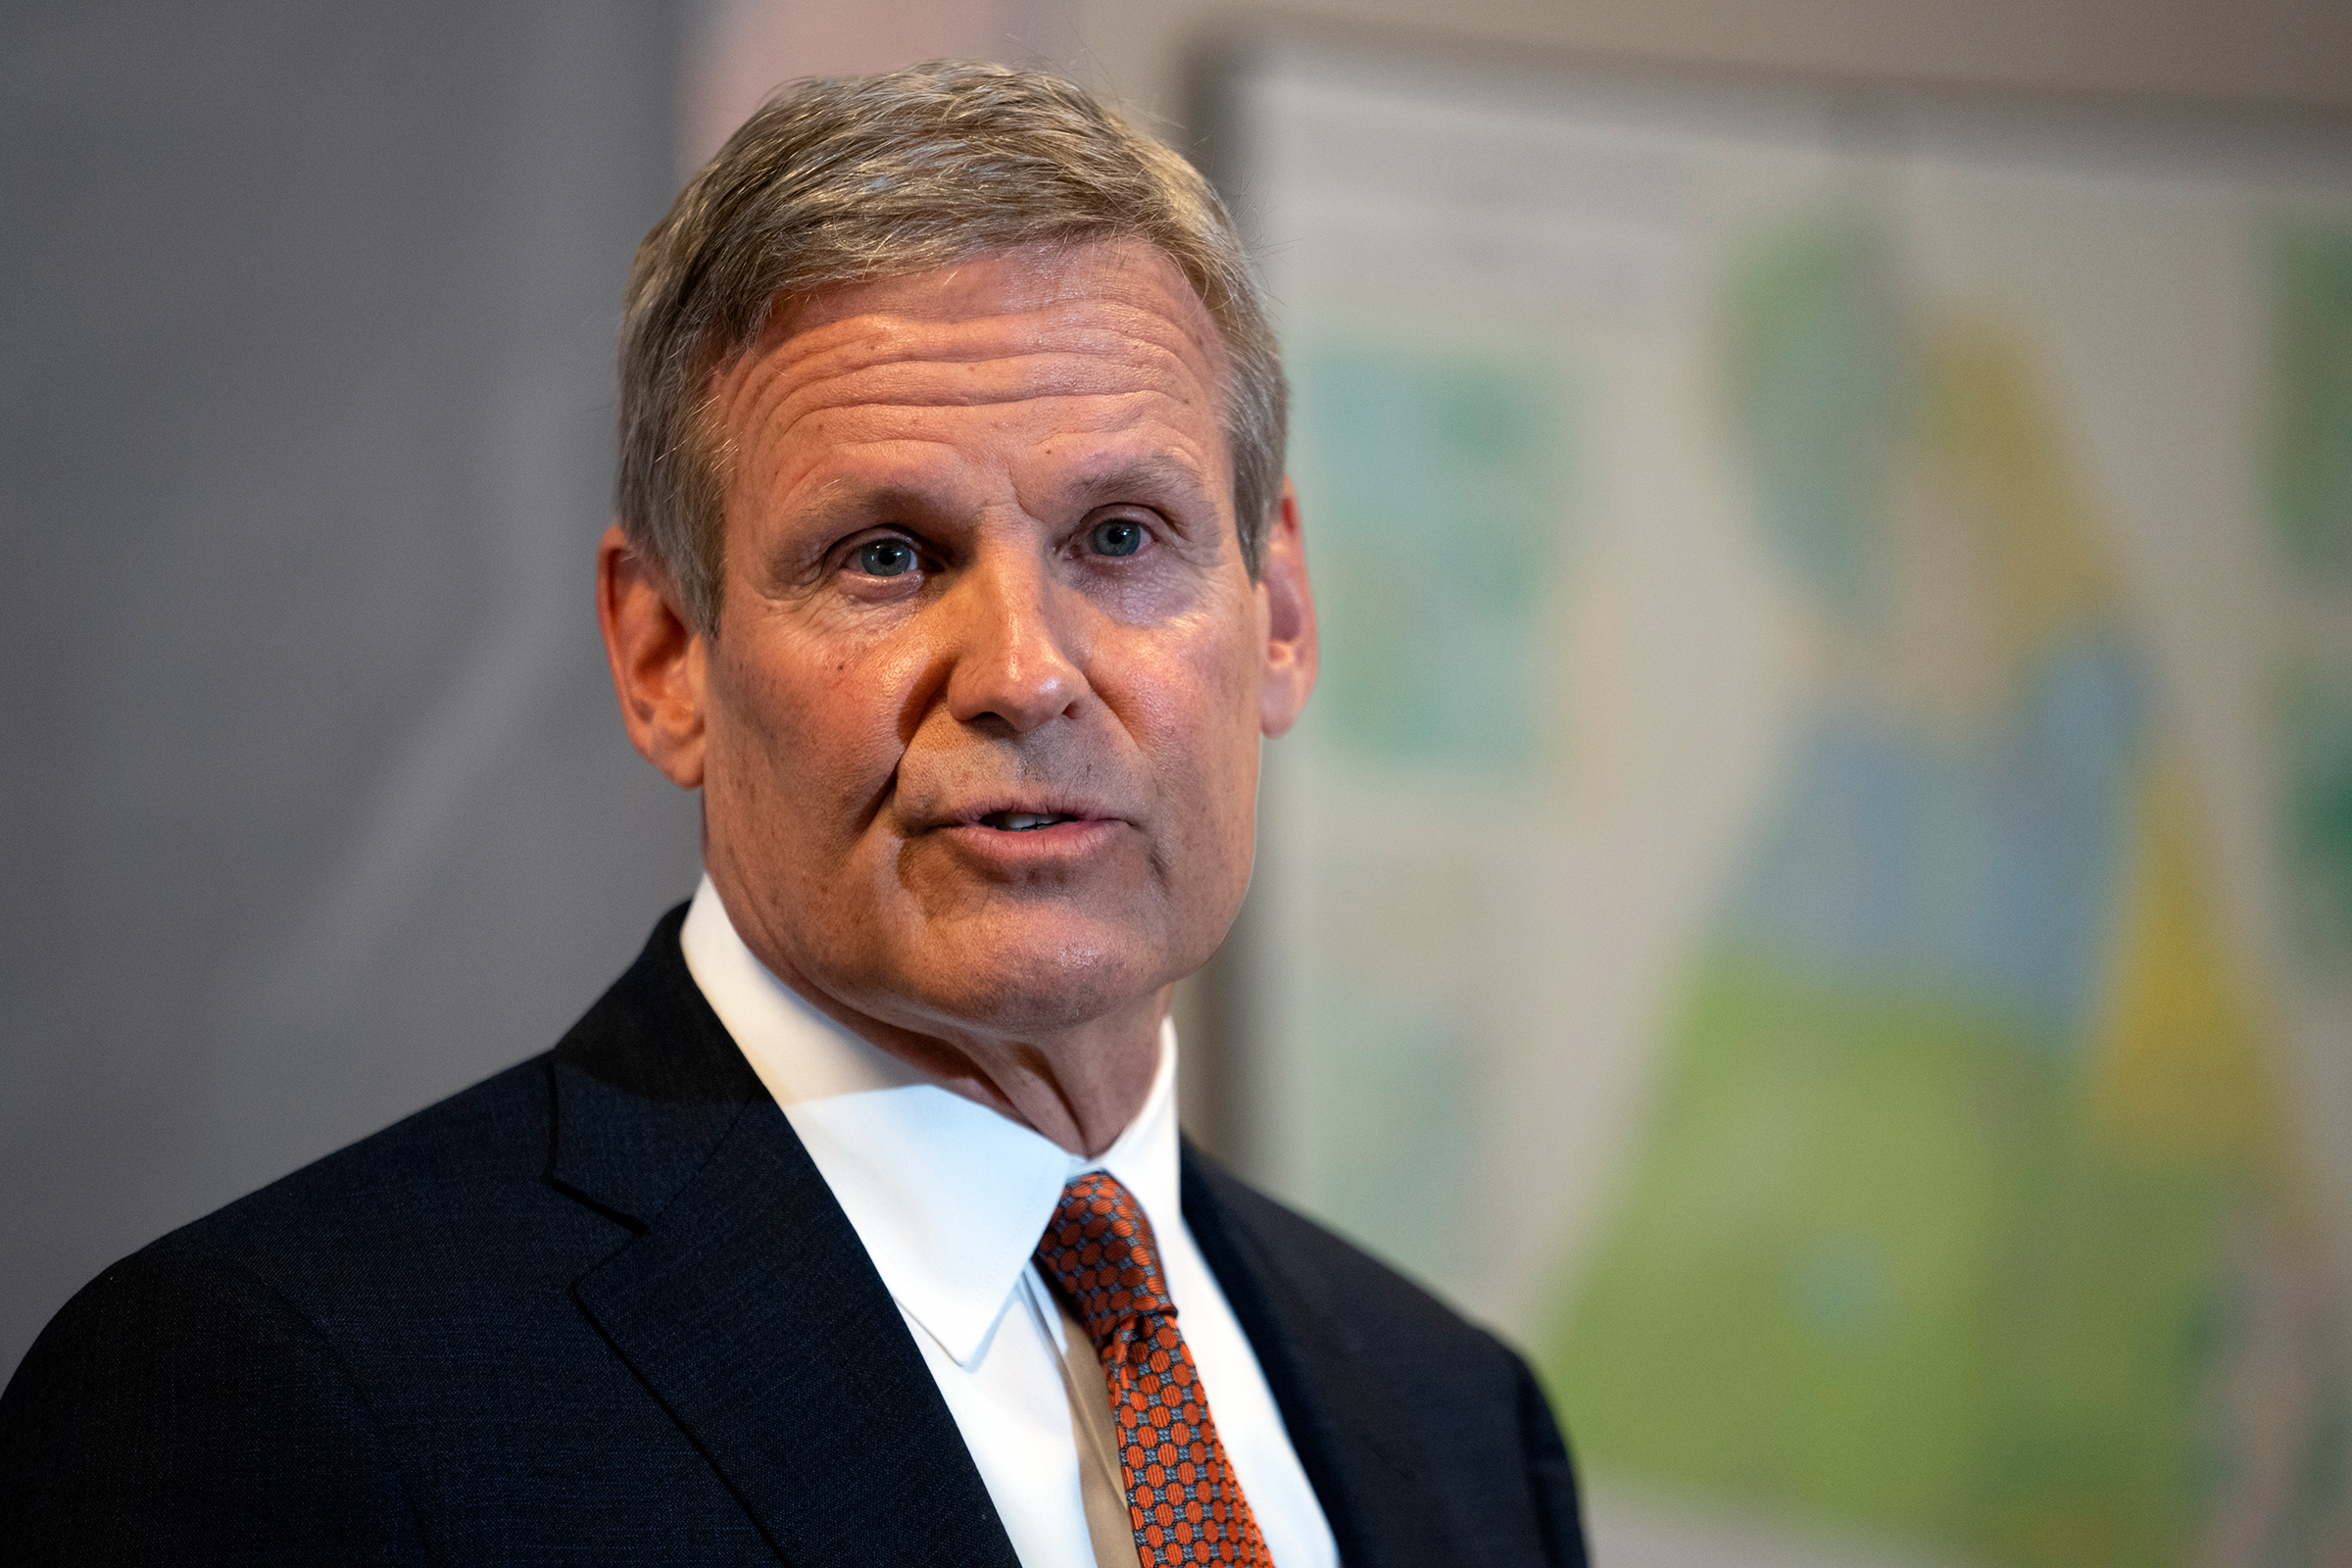 Tennessee Gov. Bill Lee responds to questions during a news conference Tuesday, April 11, in Nashville.